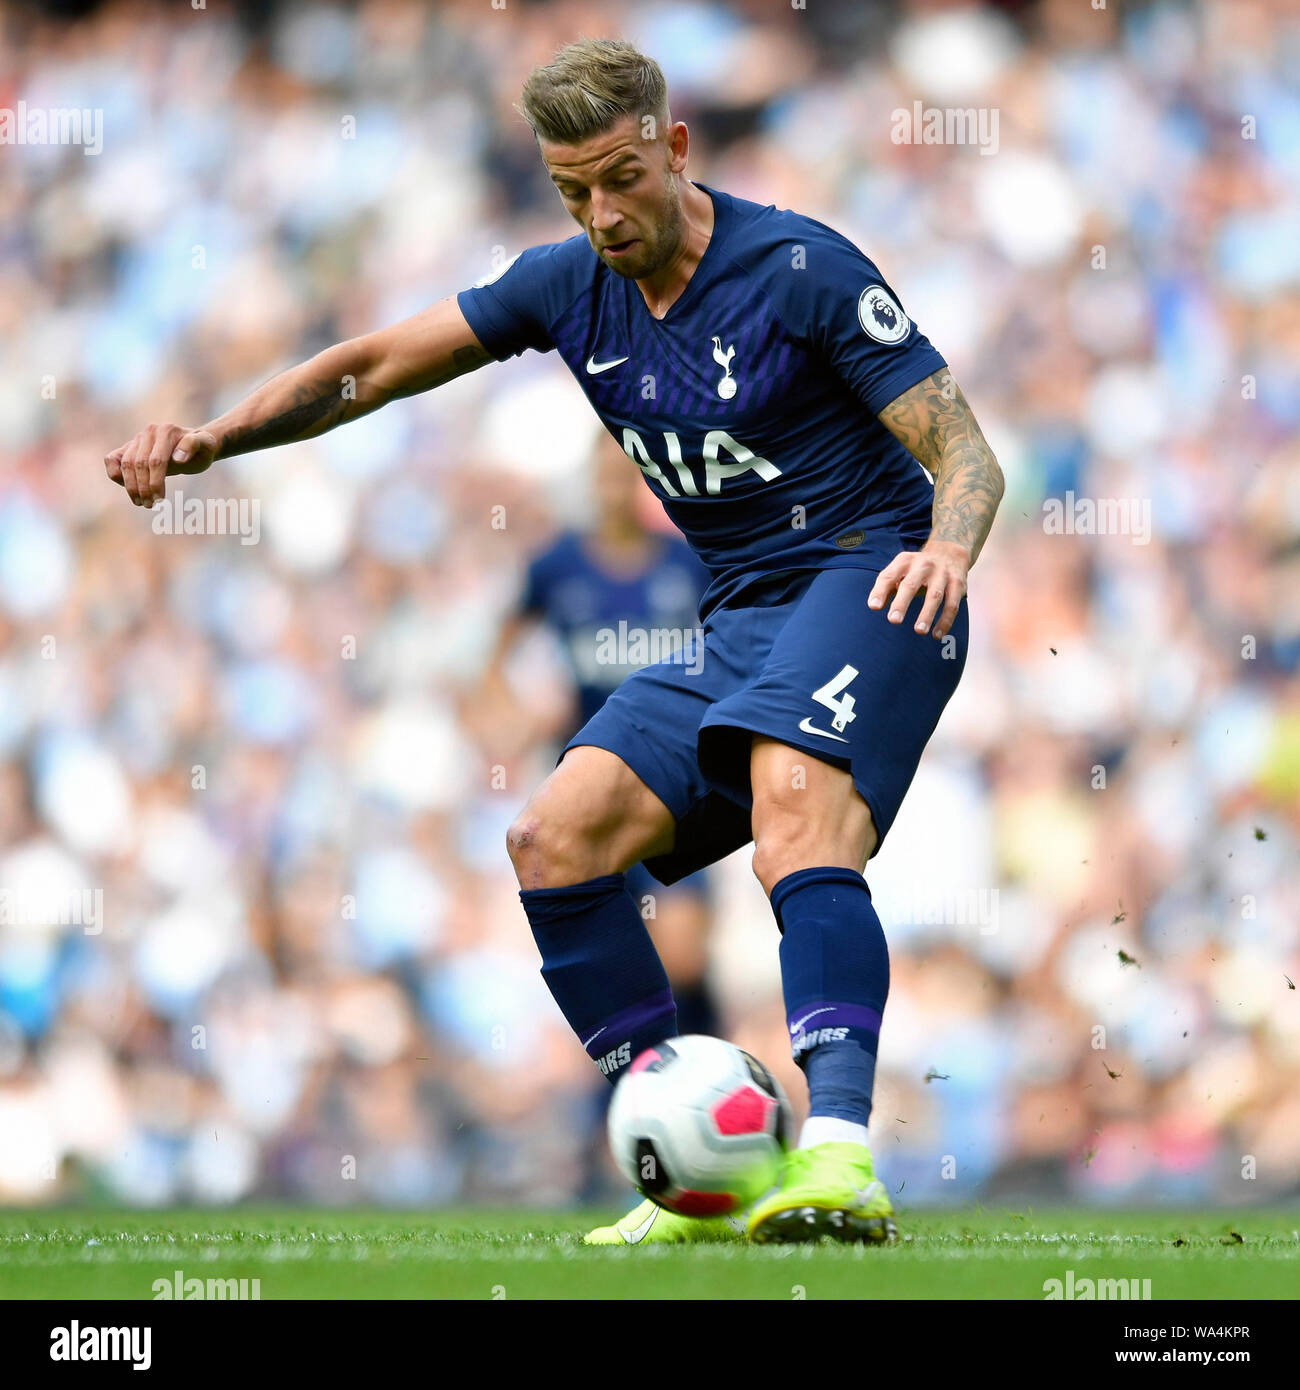 17th August 2019; Etihad Stadium, Manchester, Greater Manchester, England; Manchester City versus Tottenham Hotspur; Toby Alderweireld of Tottenham Hotspur clears the ball - Strictly Editorial Use Only. No use with unauthorized audio, video, data, fixture lists, club/league logos or 'live' services. Online in-match use limited to 120 images, no video emulation. Stock Photo